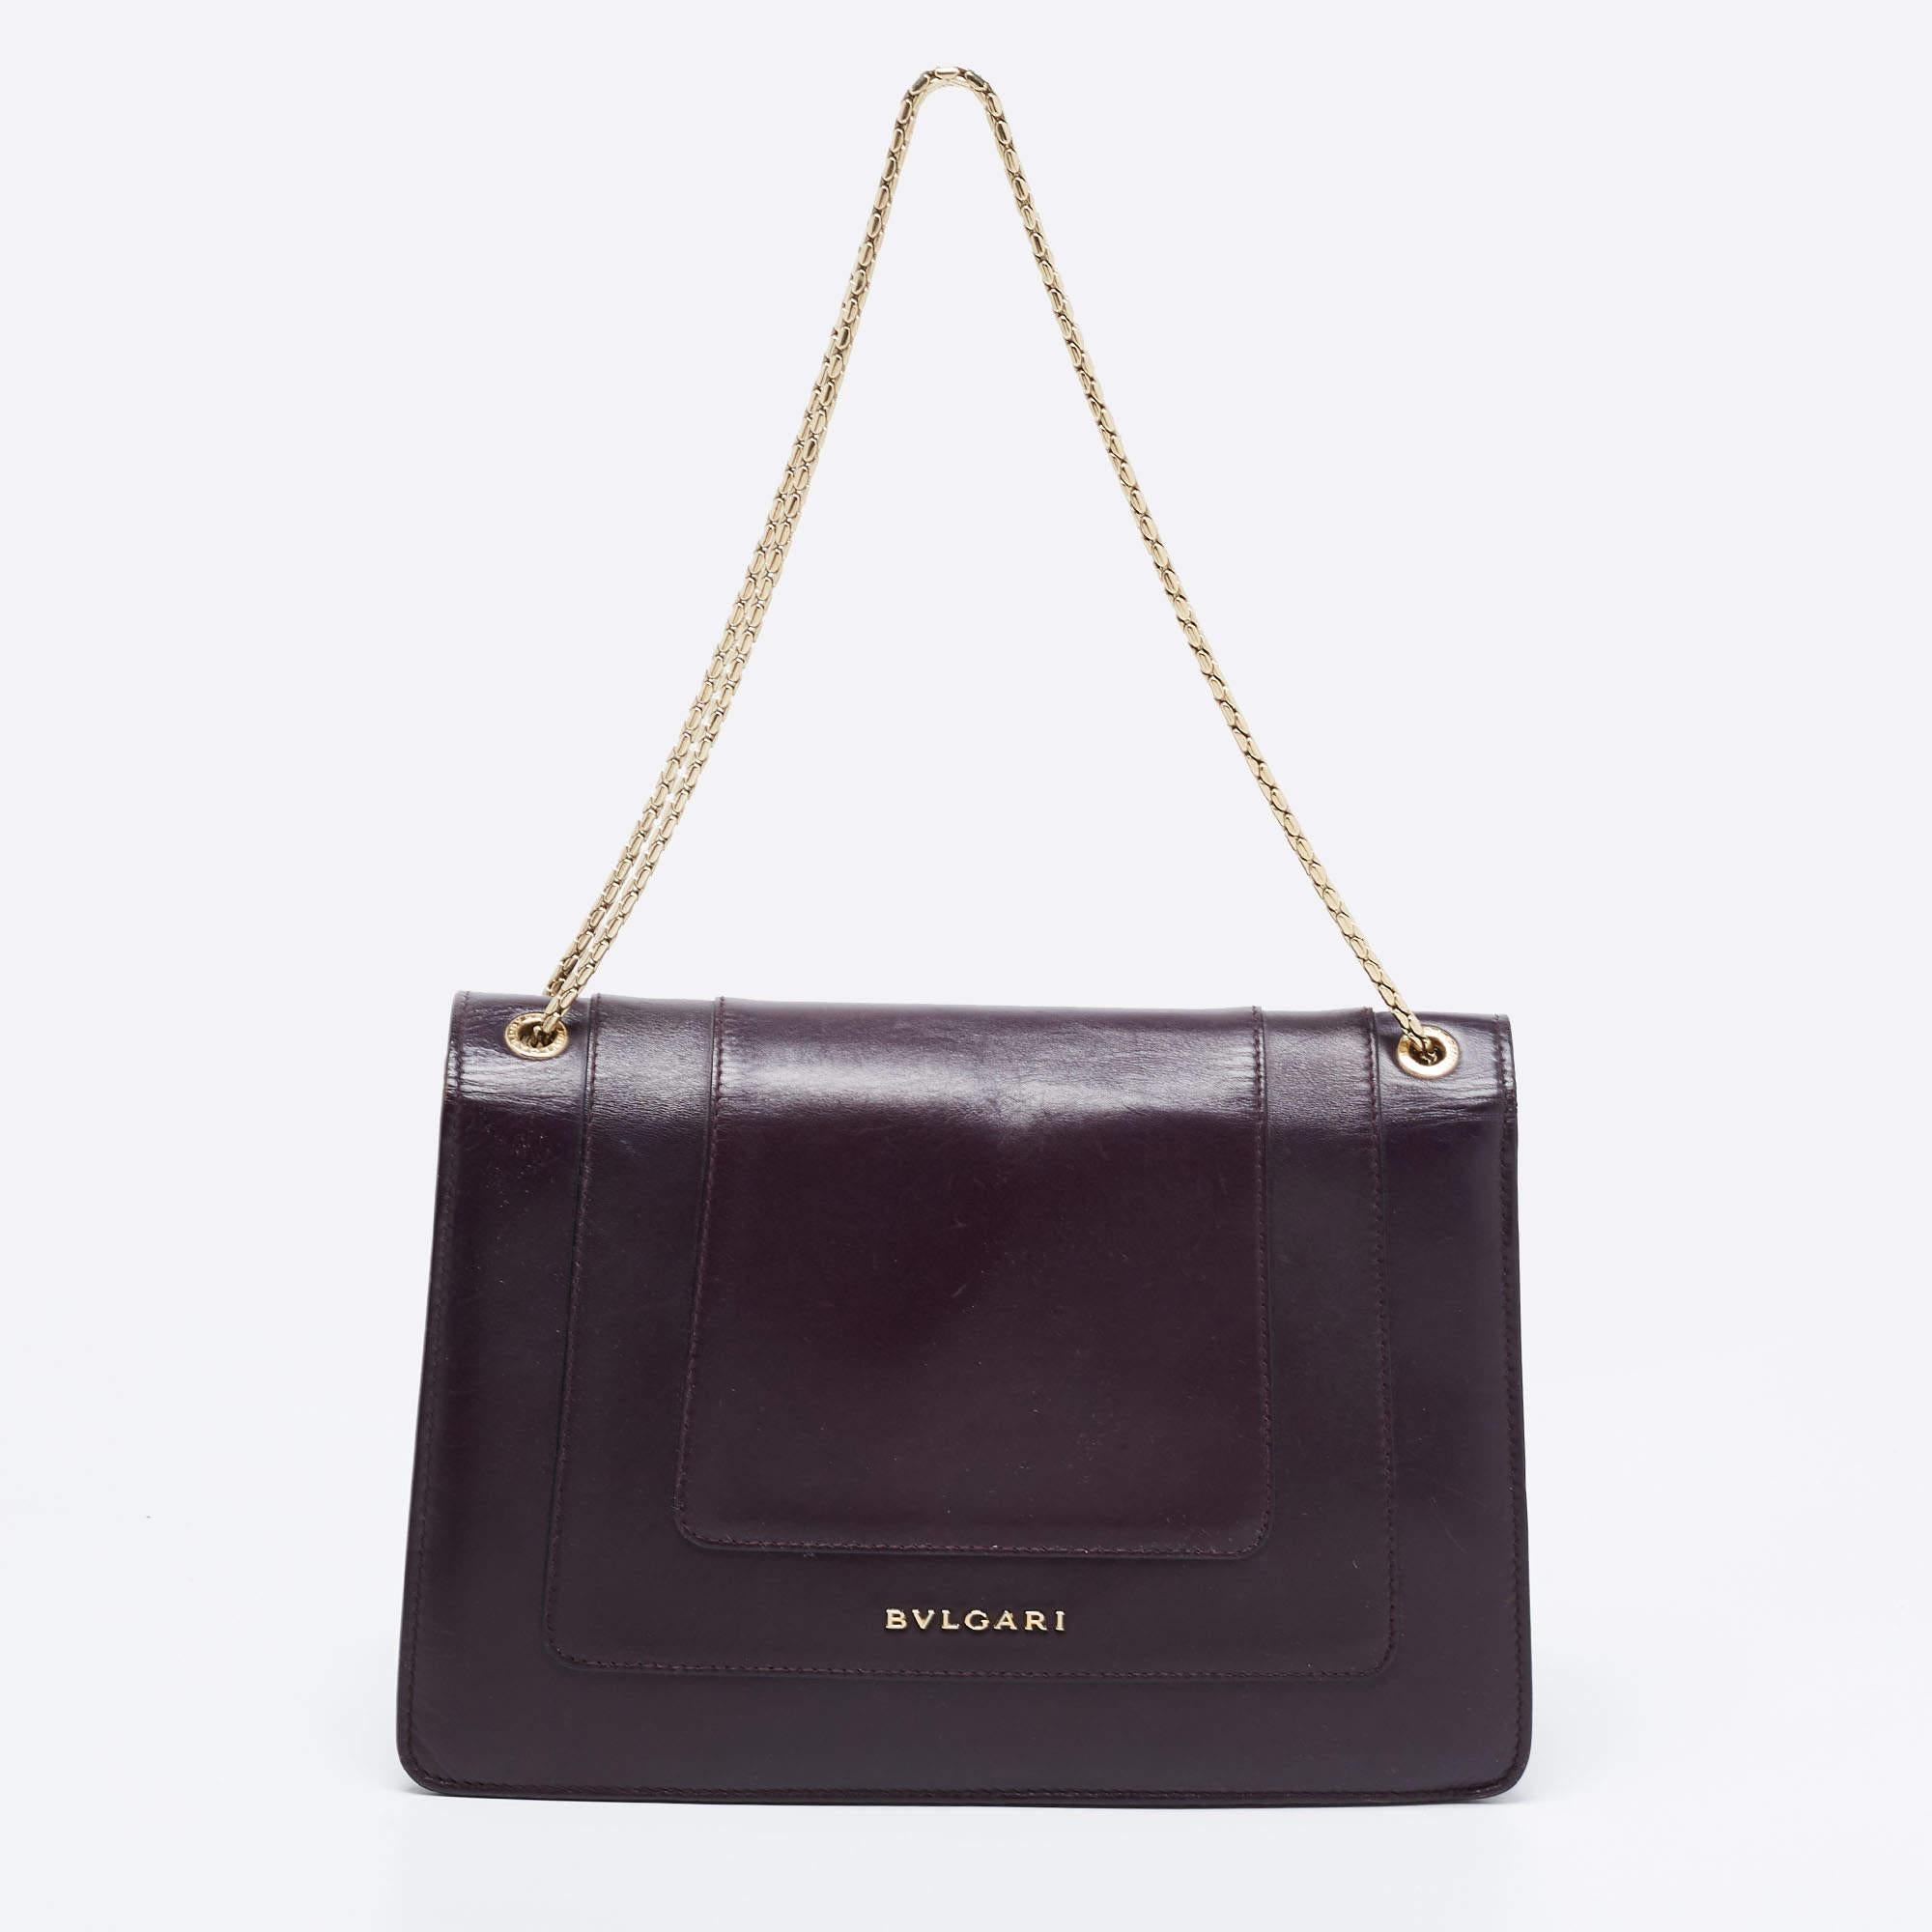 Carry this shoulder bag in style and experience complete luxury and practicality. It is created using quality material and features a stunning style, a shoulder strap, and a roomy interior.

